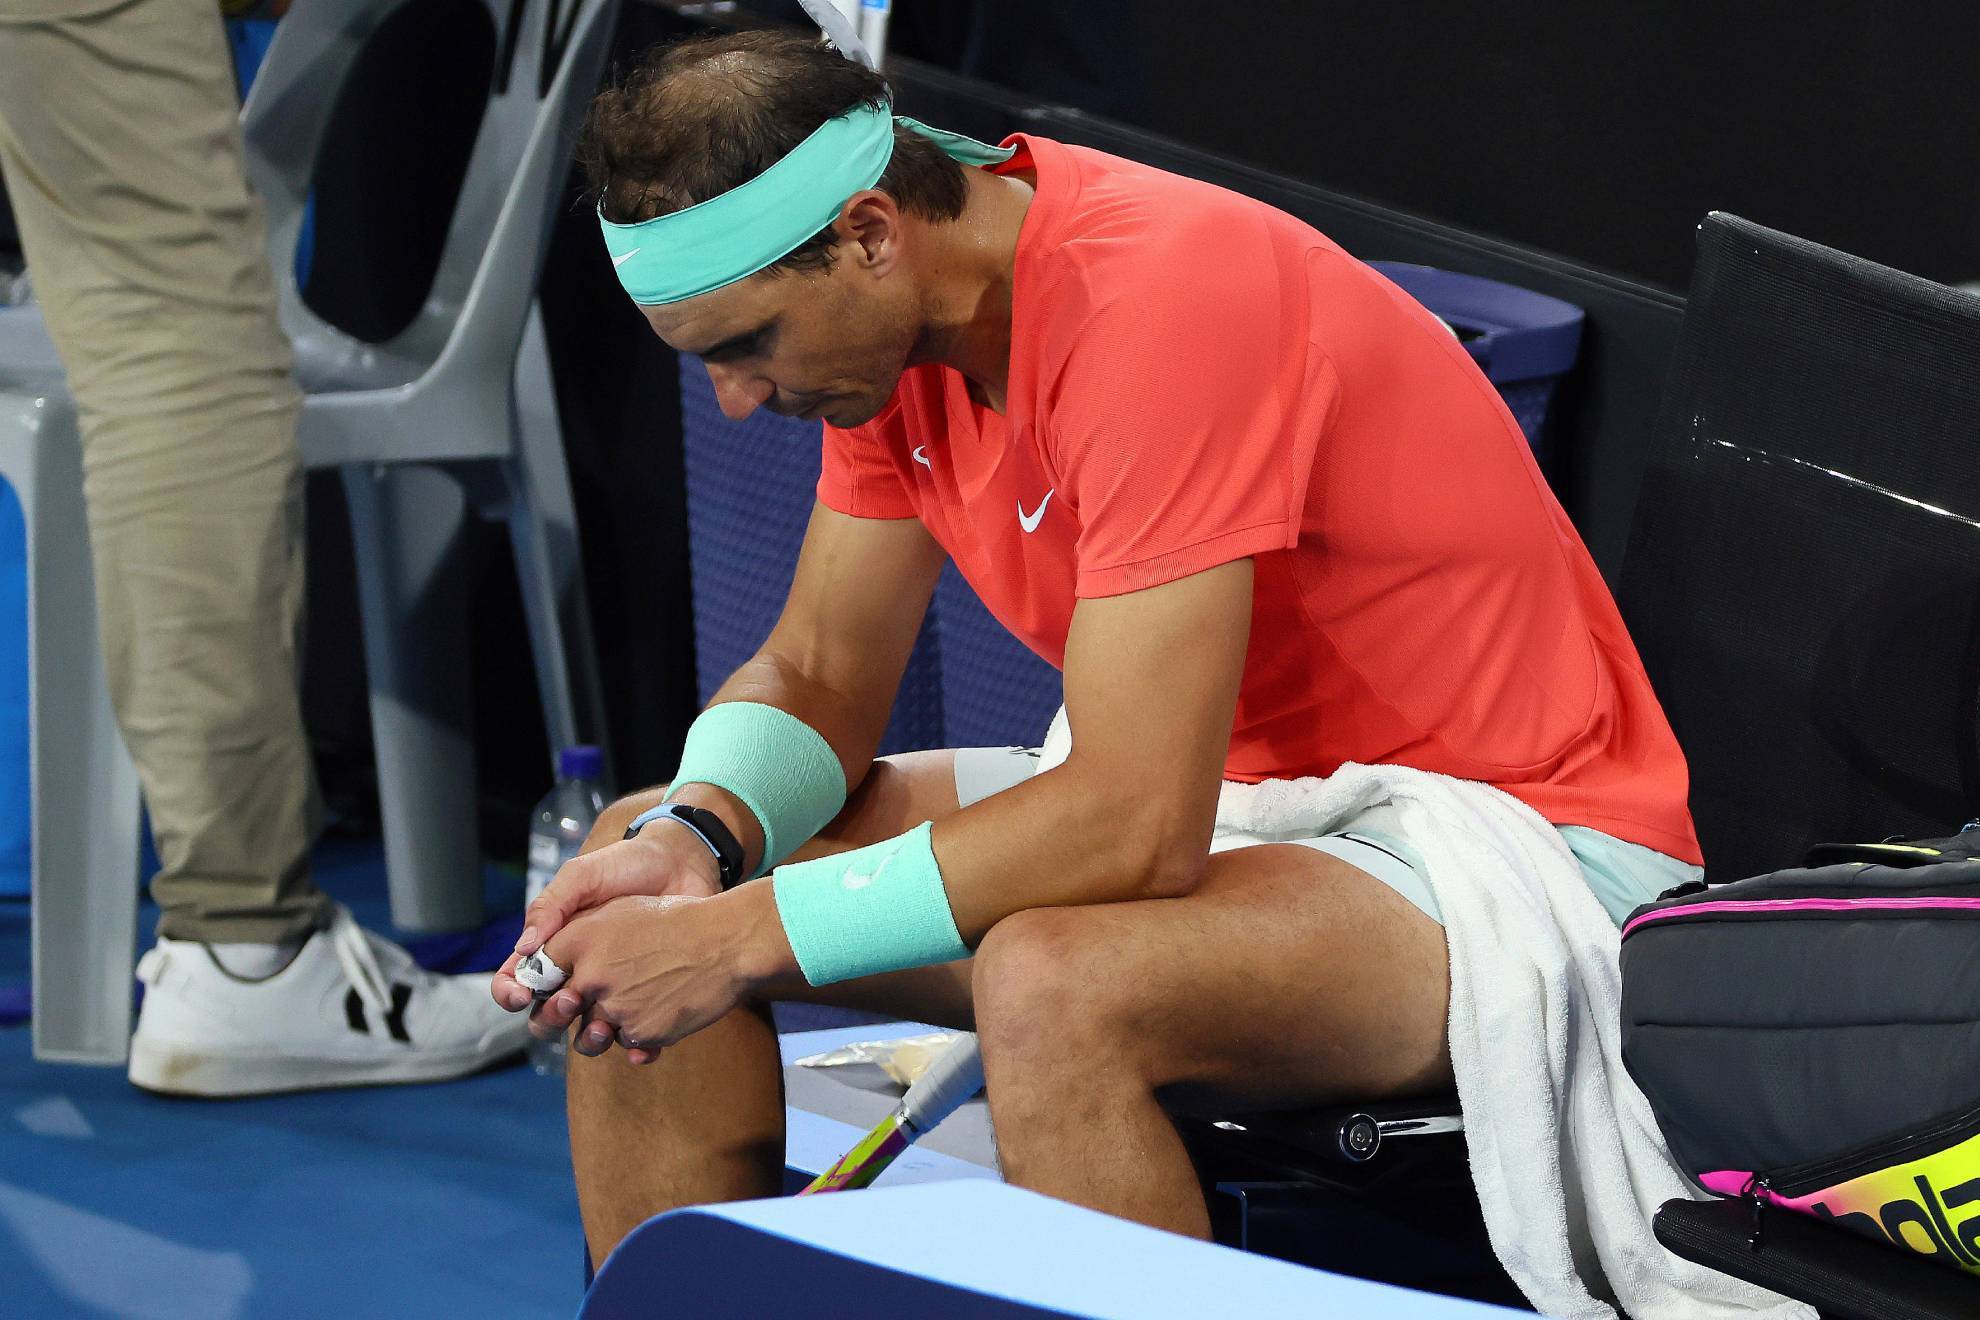 Rafa Nadal will not play the Australian Open: What injury is the Spanish tennis player suffering from?